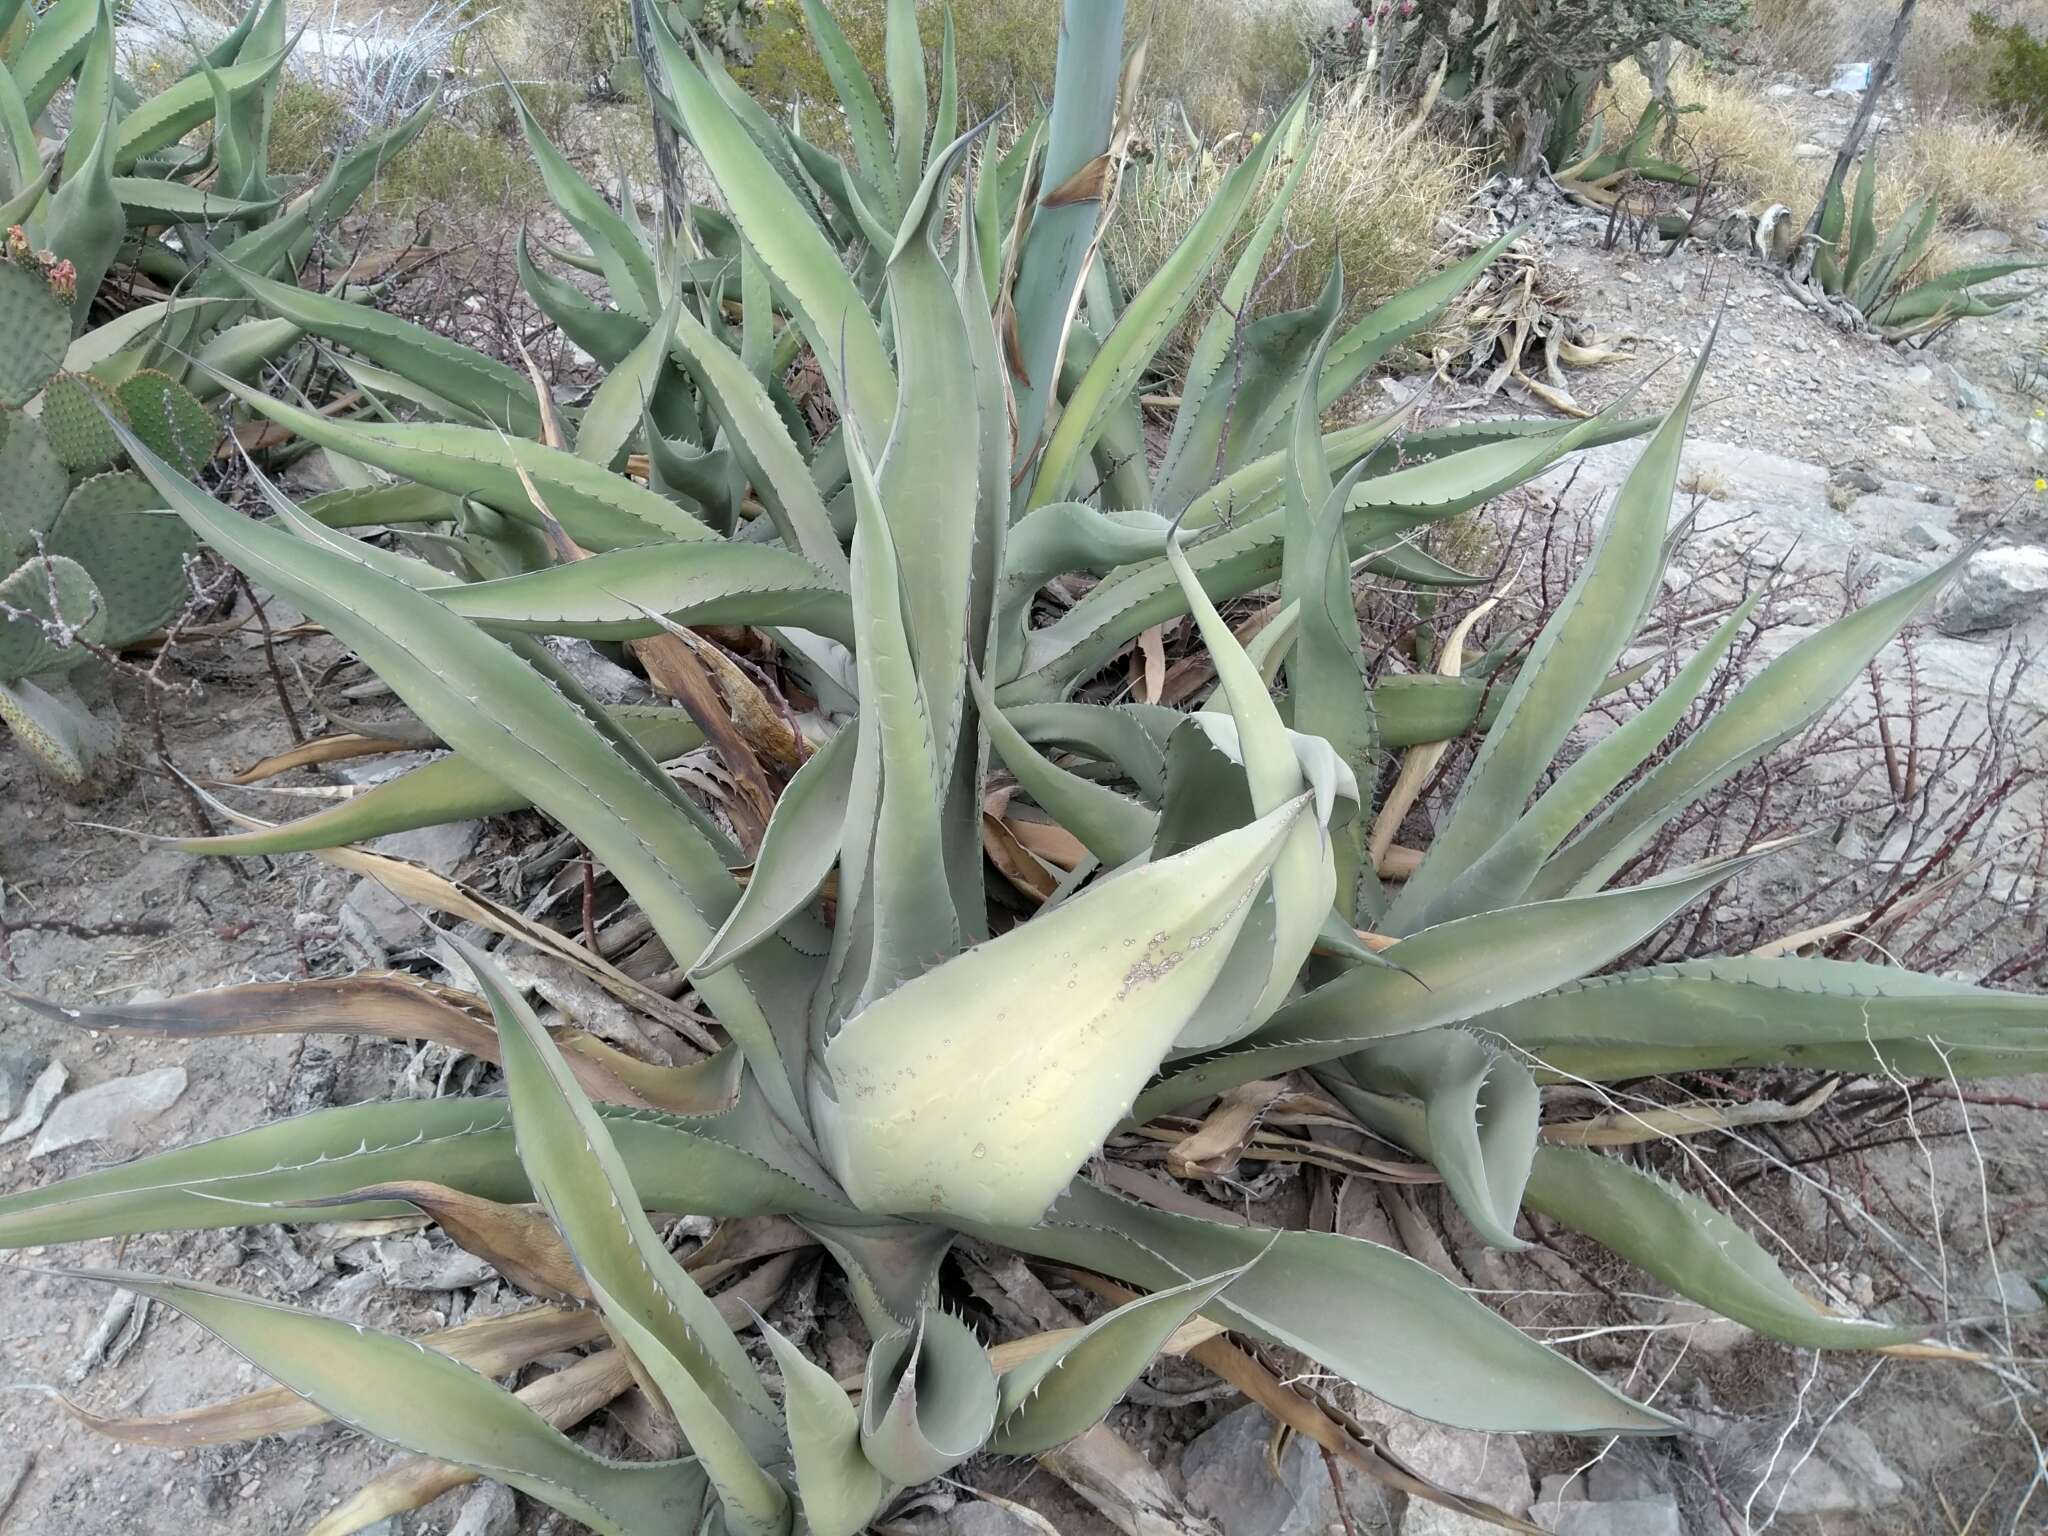 Image of Agave asperrima subsp. potosiensis (Gentry) B. Ullrich